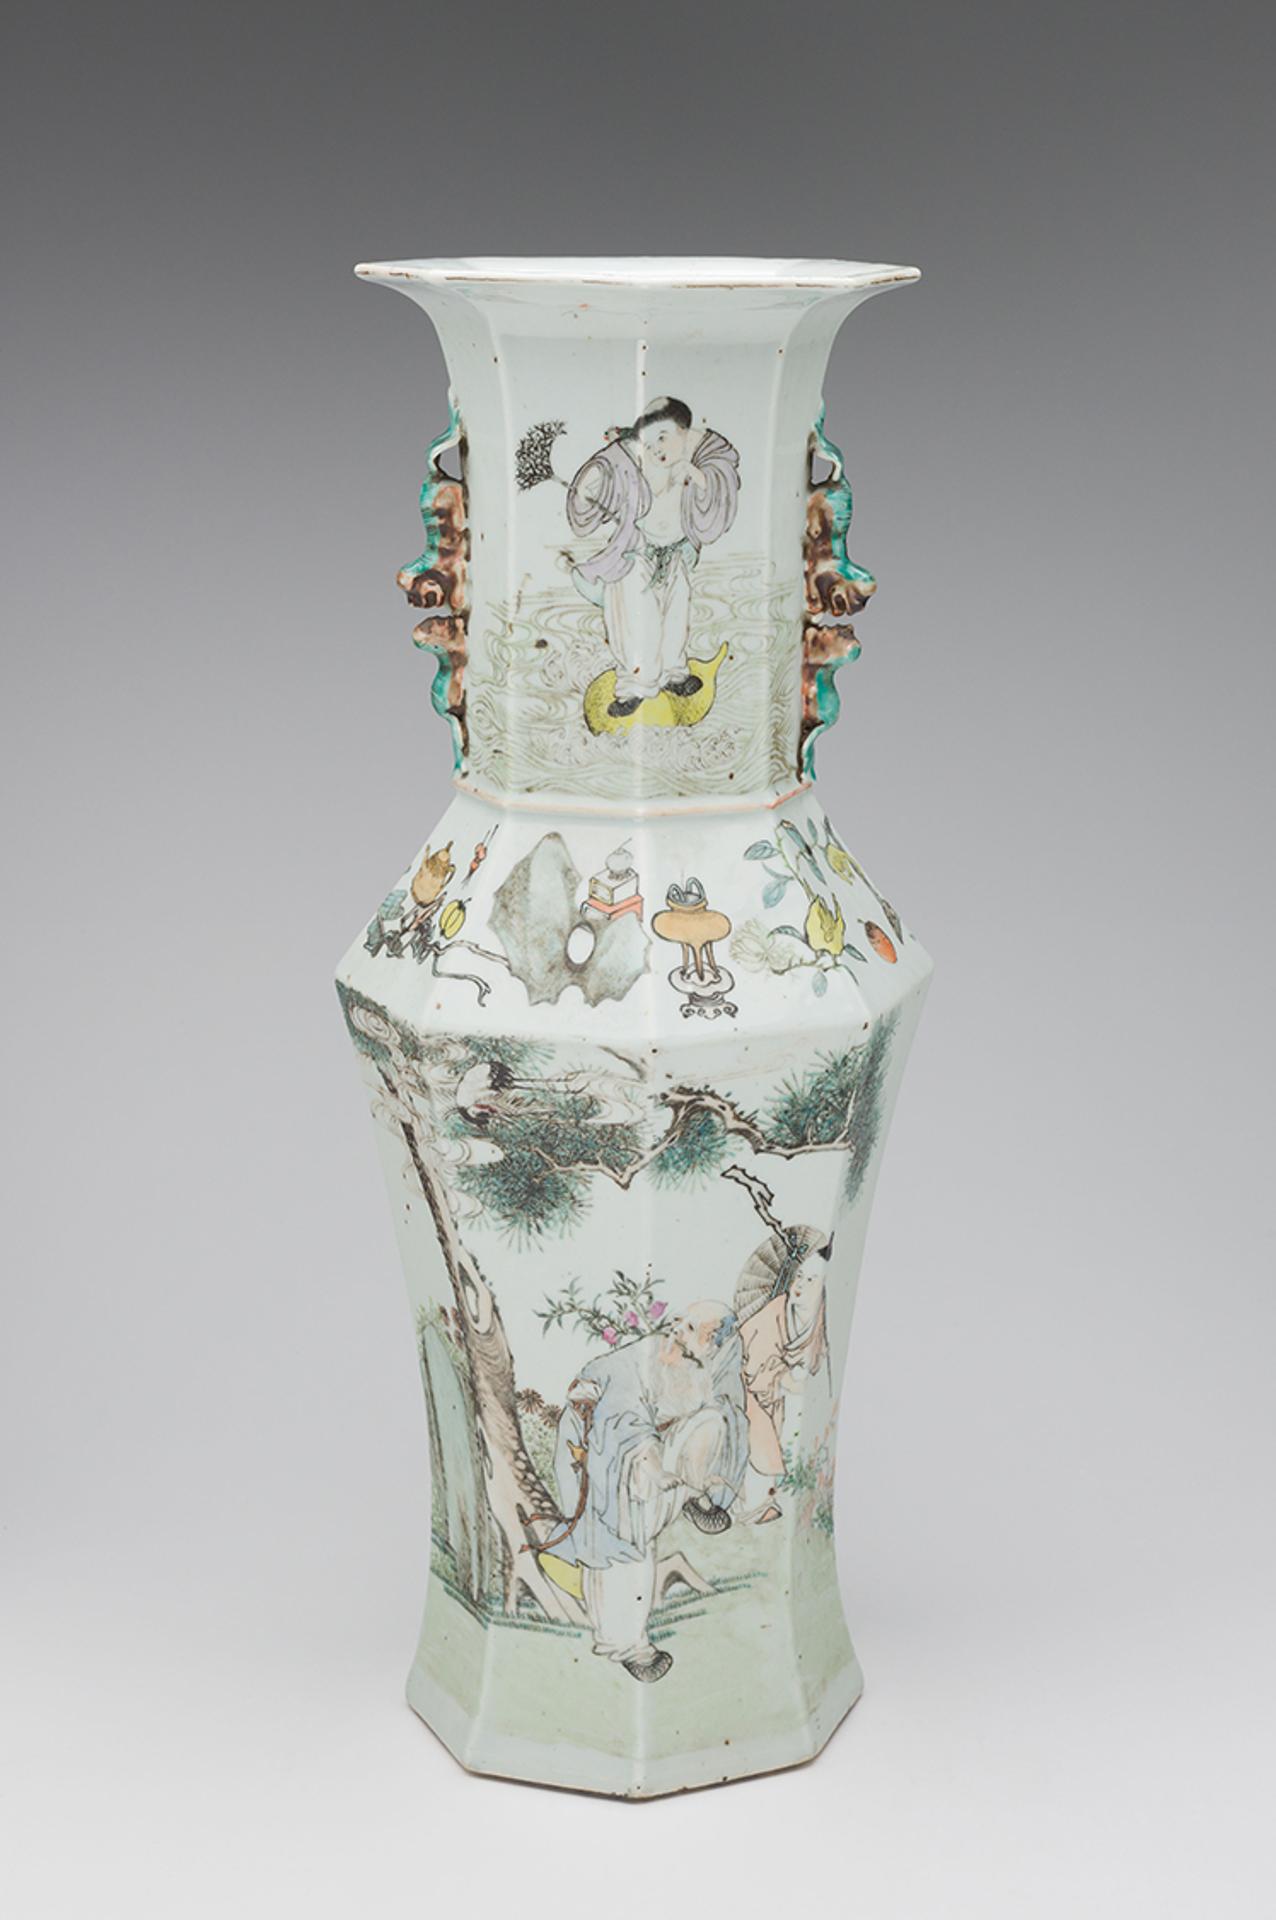 Chinese Art - A Chinese Qianjiang 'Longevity' Vase, Republican Period, Early 20th Century